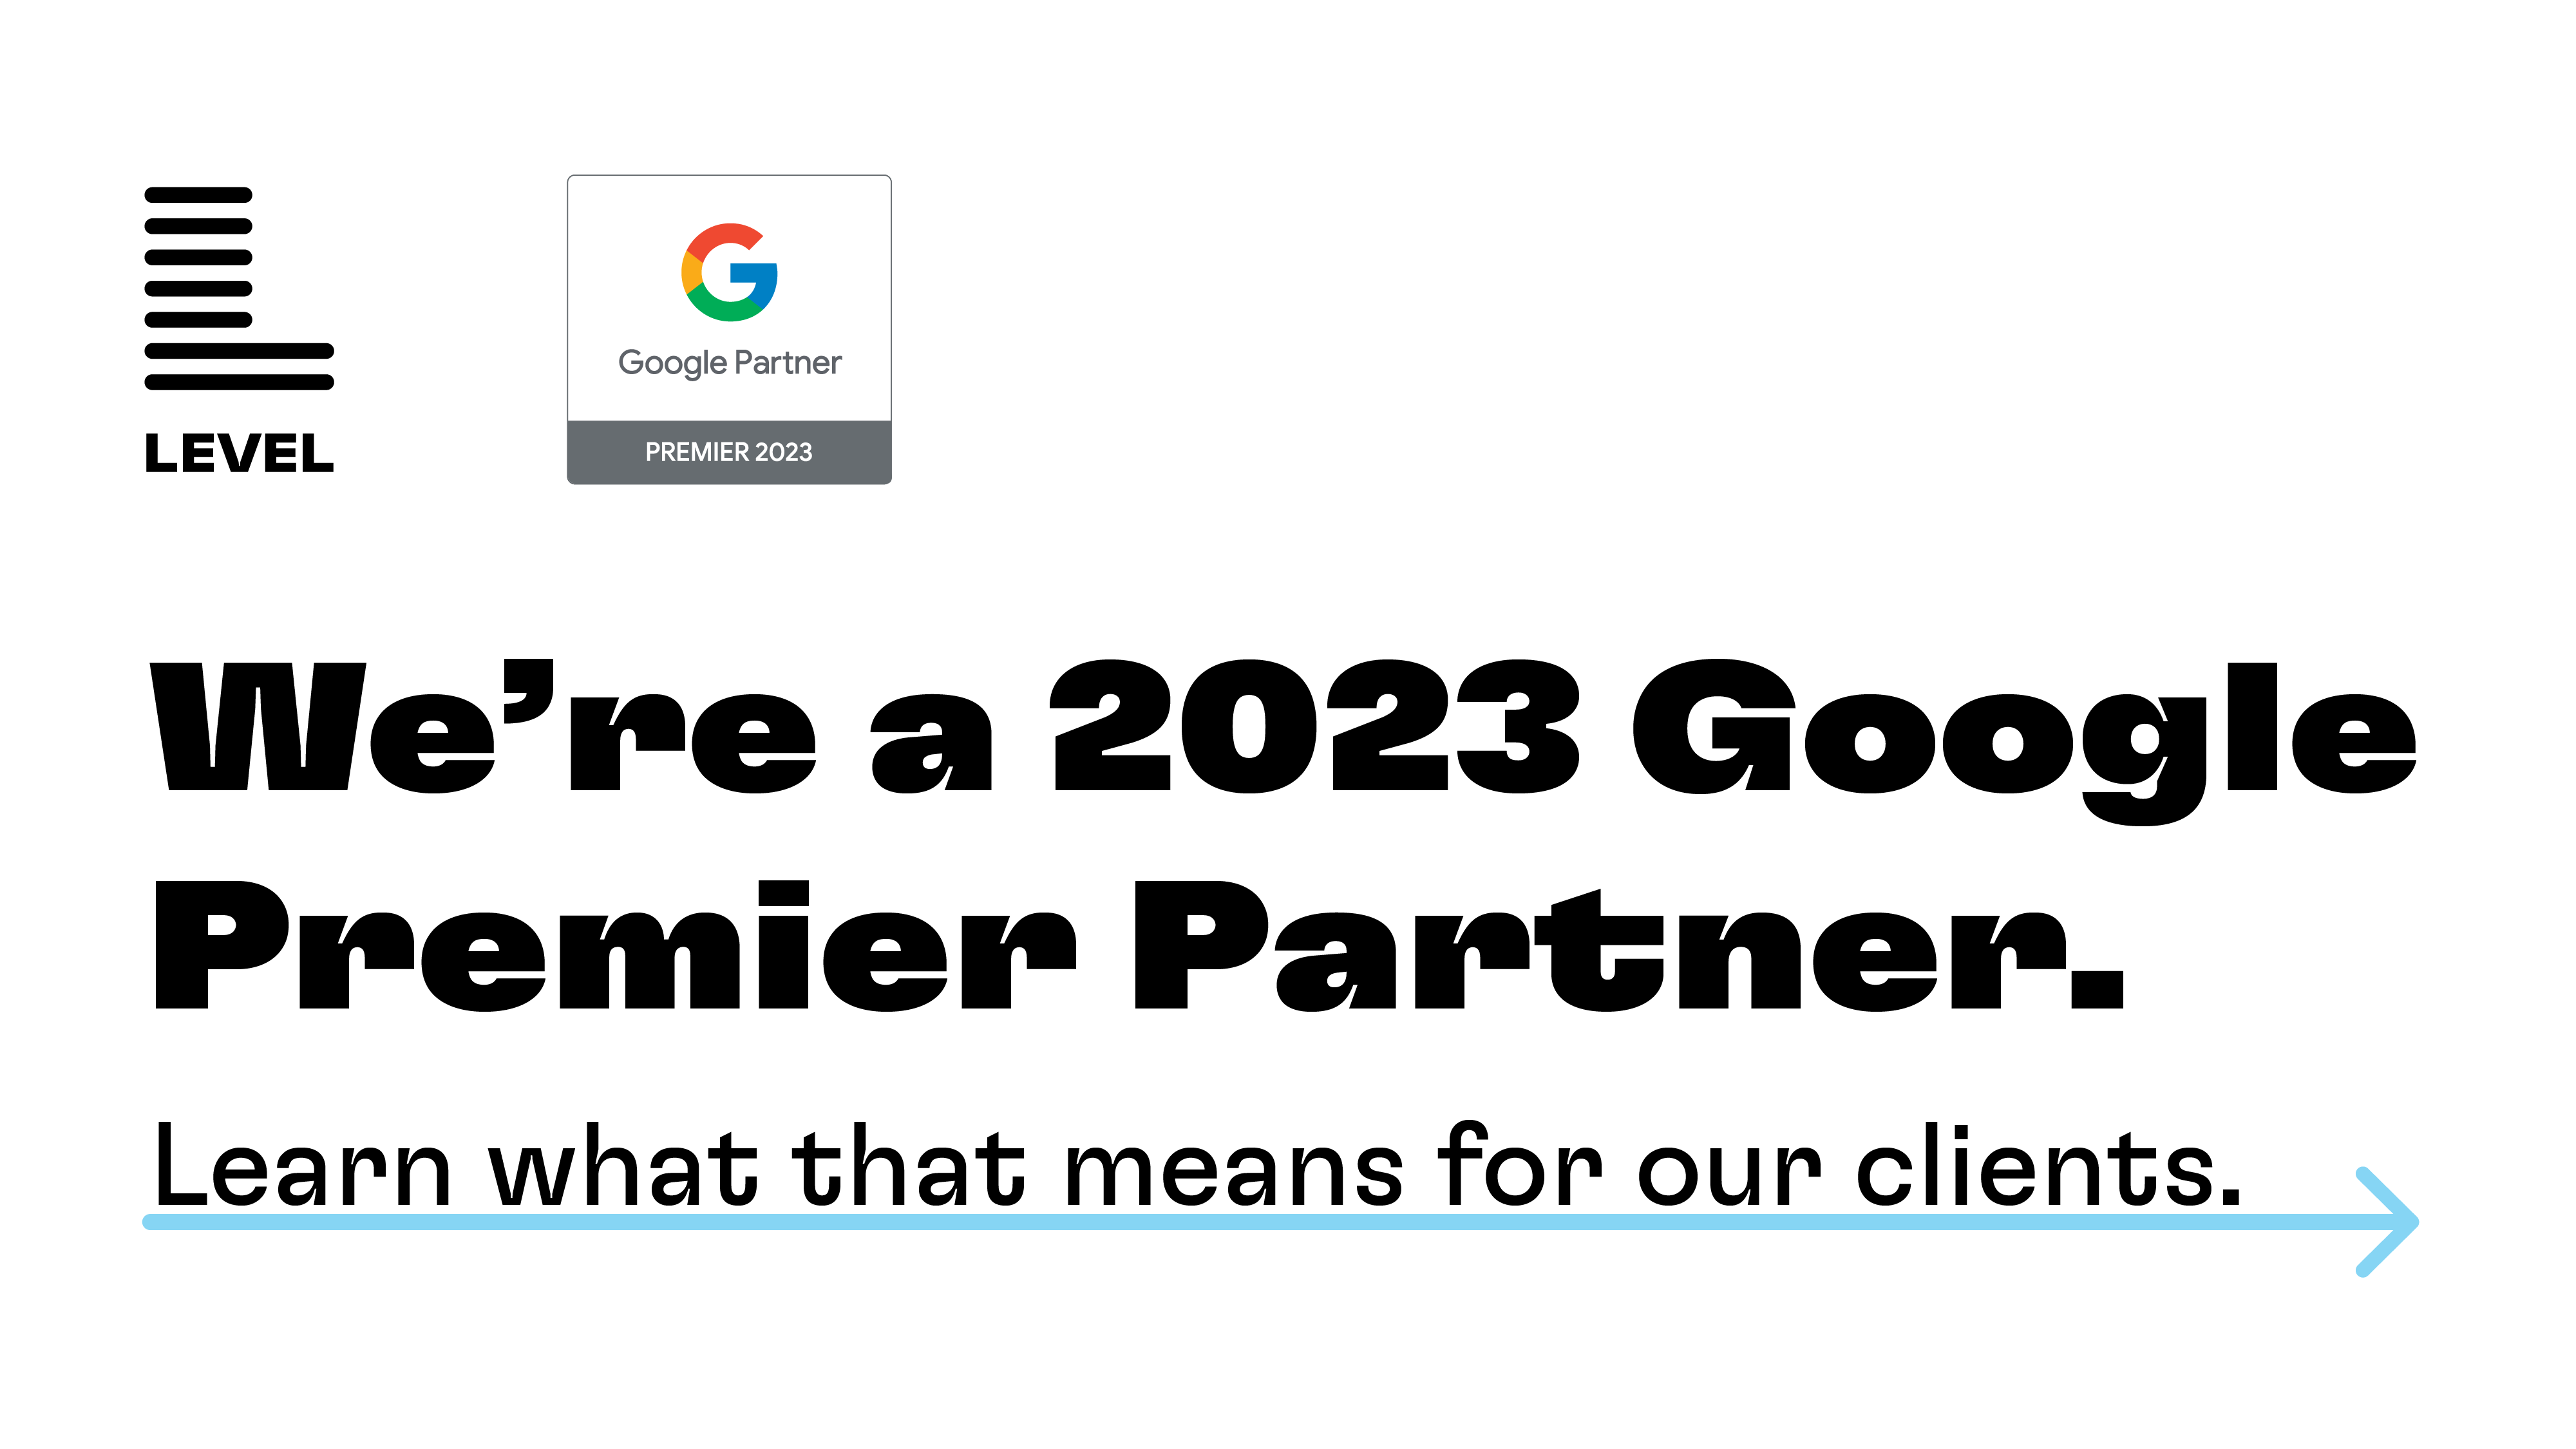 We're a 2023 Google Premier Partner. Learn what that means for our clients.